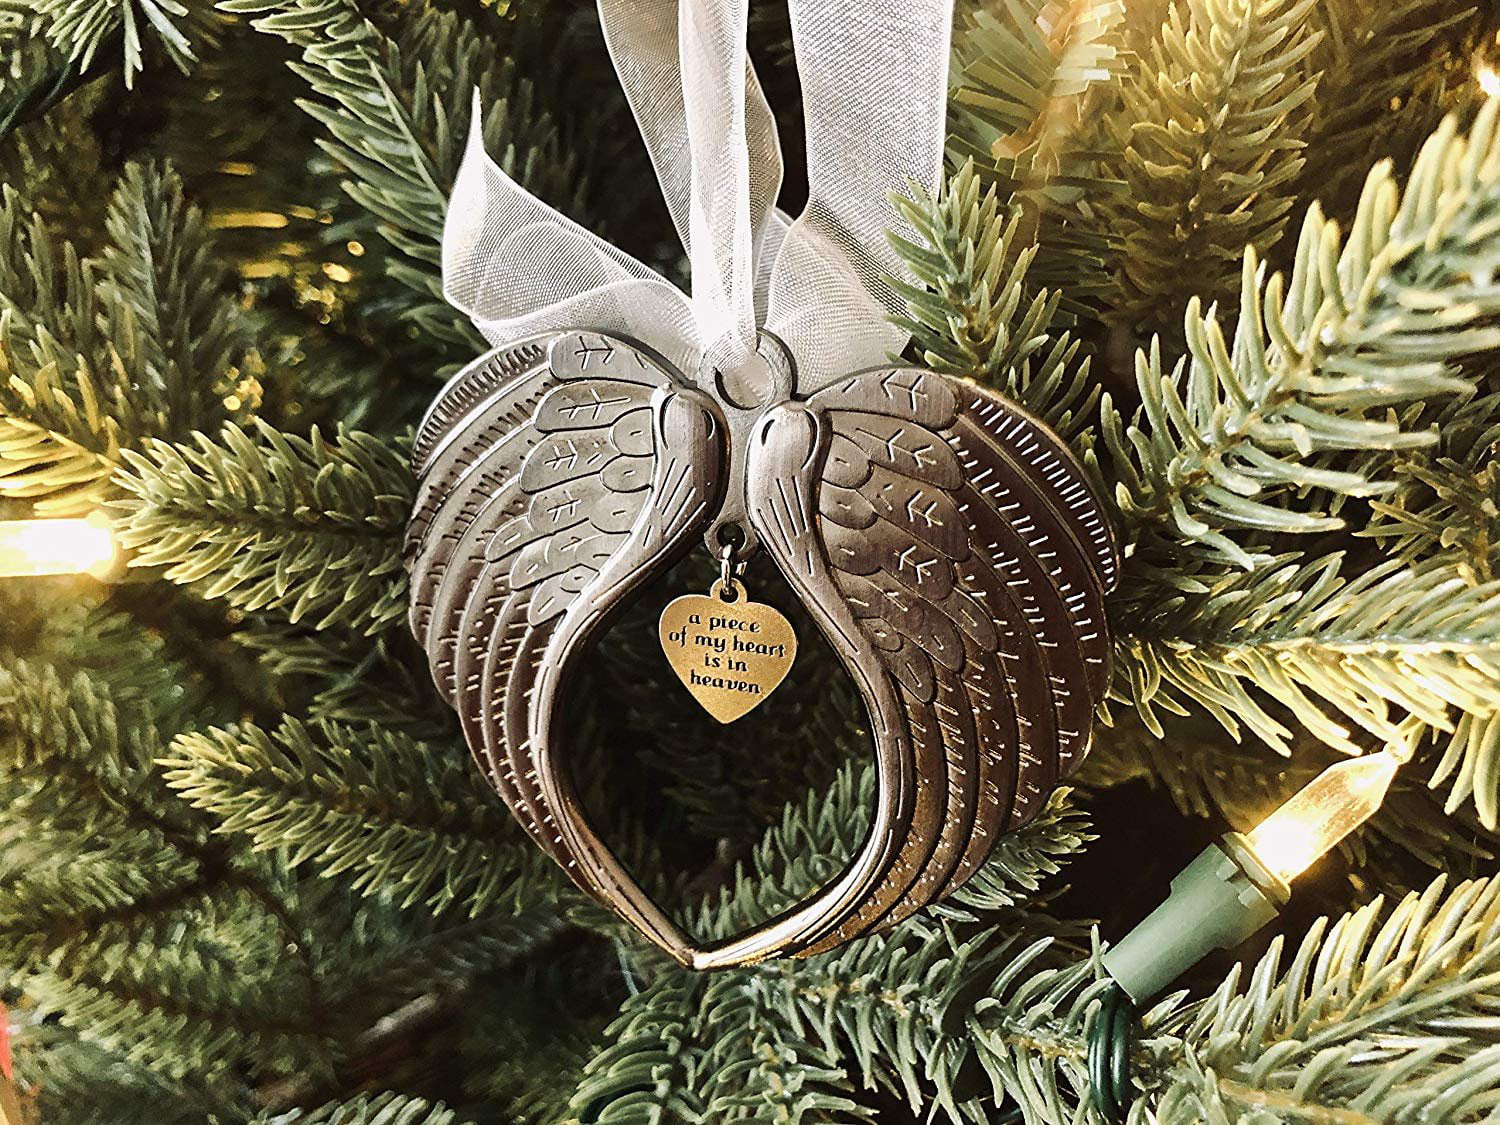 Memorial Ornaments for Loss of Loved One Personalize,A Piece of My Heart is in Heaven Memorial Ornament,Christmas Tree Hanging Decorations Xmas Gifts 001-Son Christmas Ornaments Clear Heart Ball